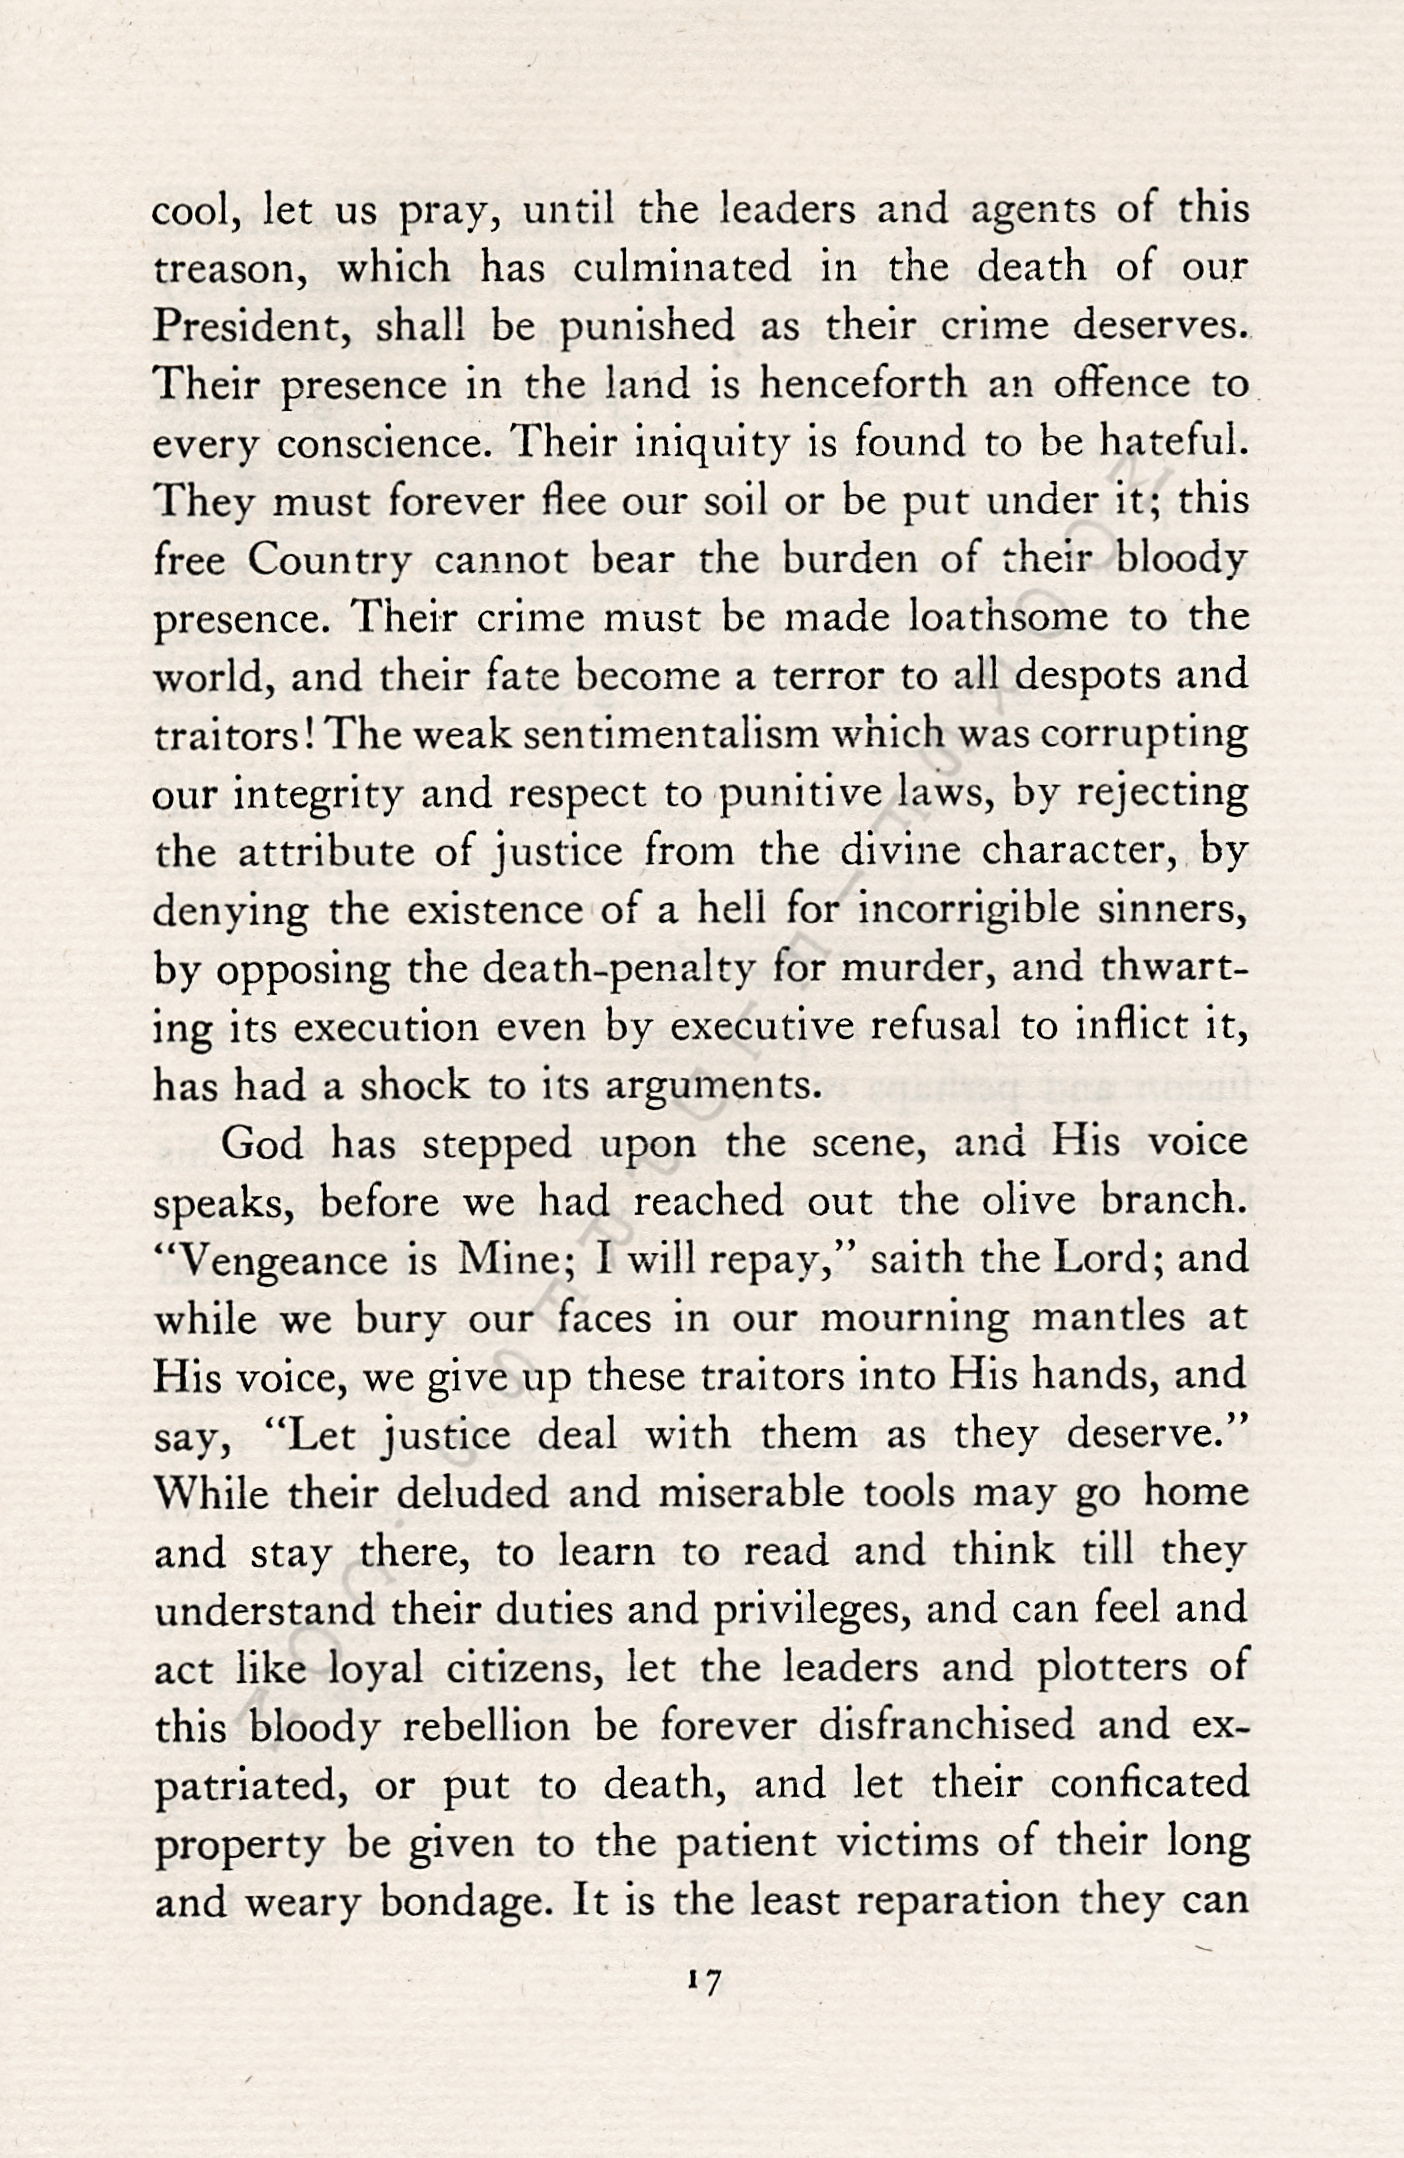 ON ACCOUNT
                      OF THE ASSASSINATION OF PRESIDENT LINCOLN BY
                      MORTIMER BLAKE